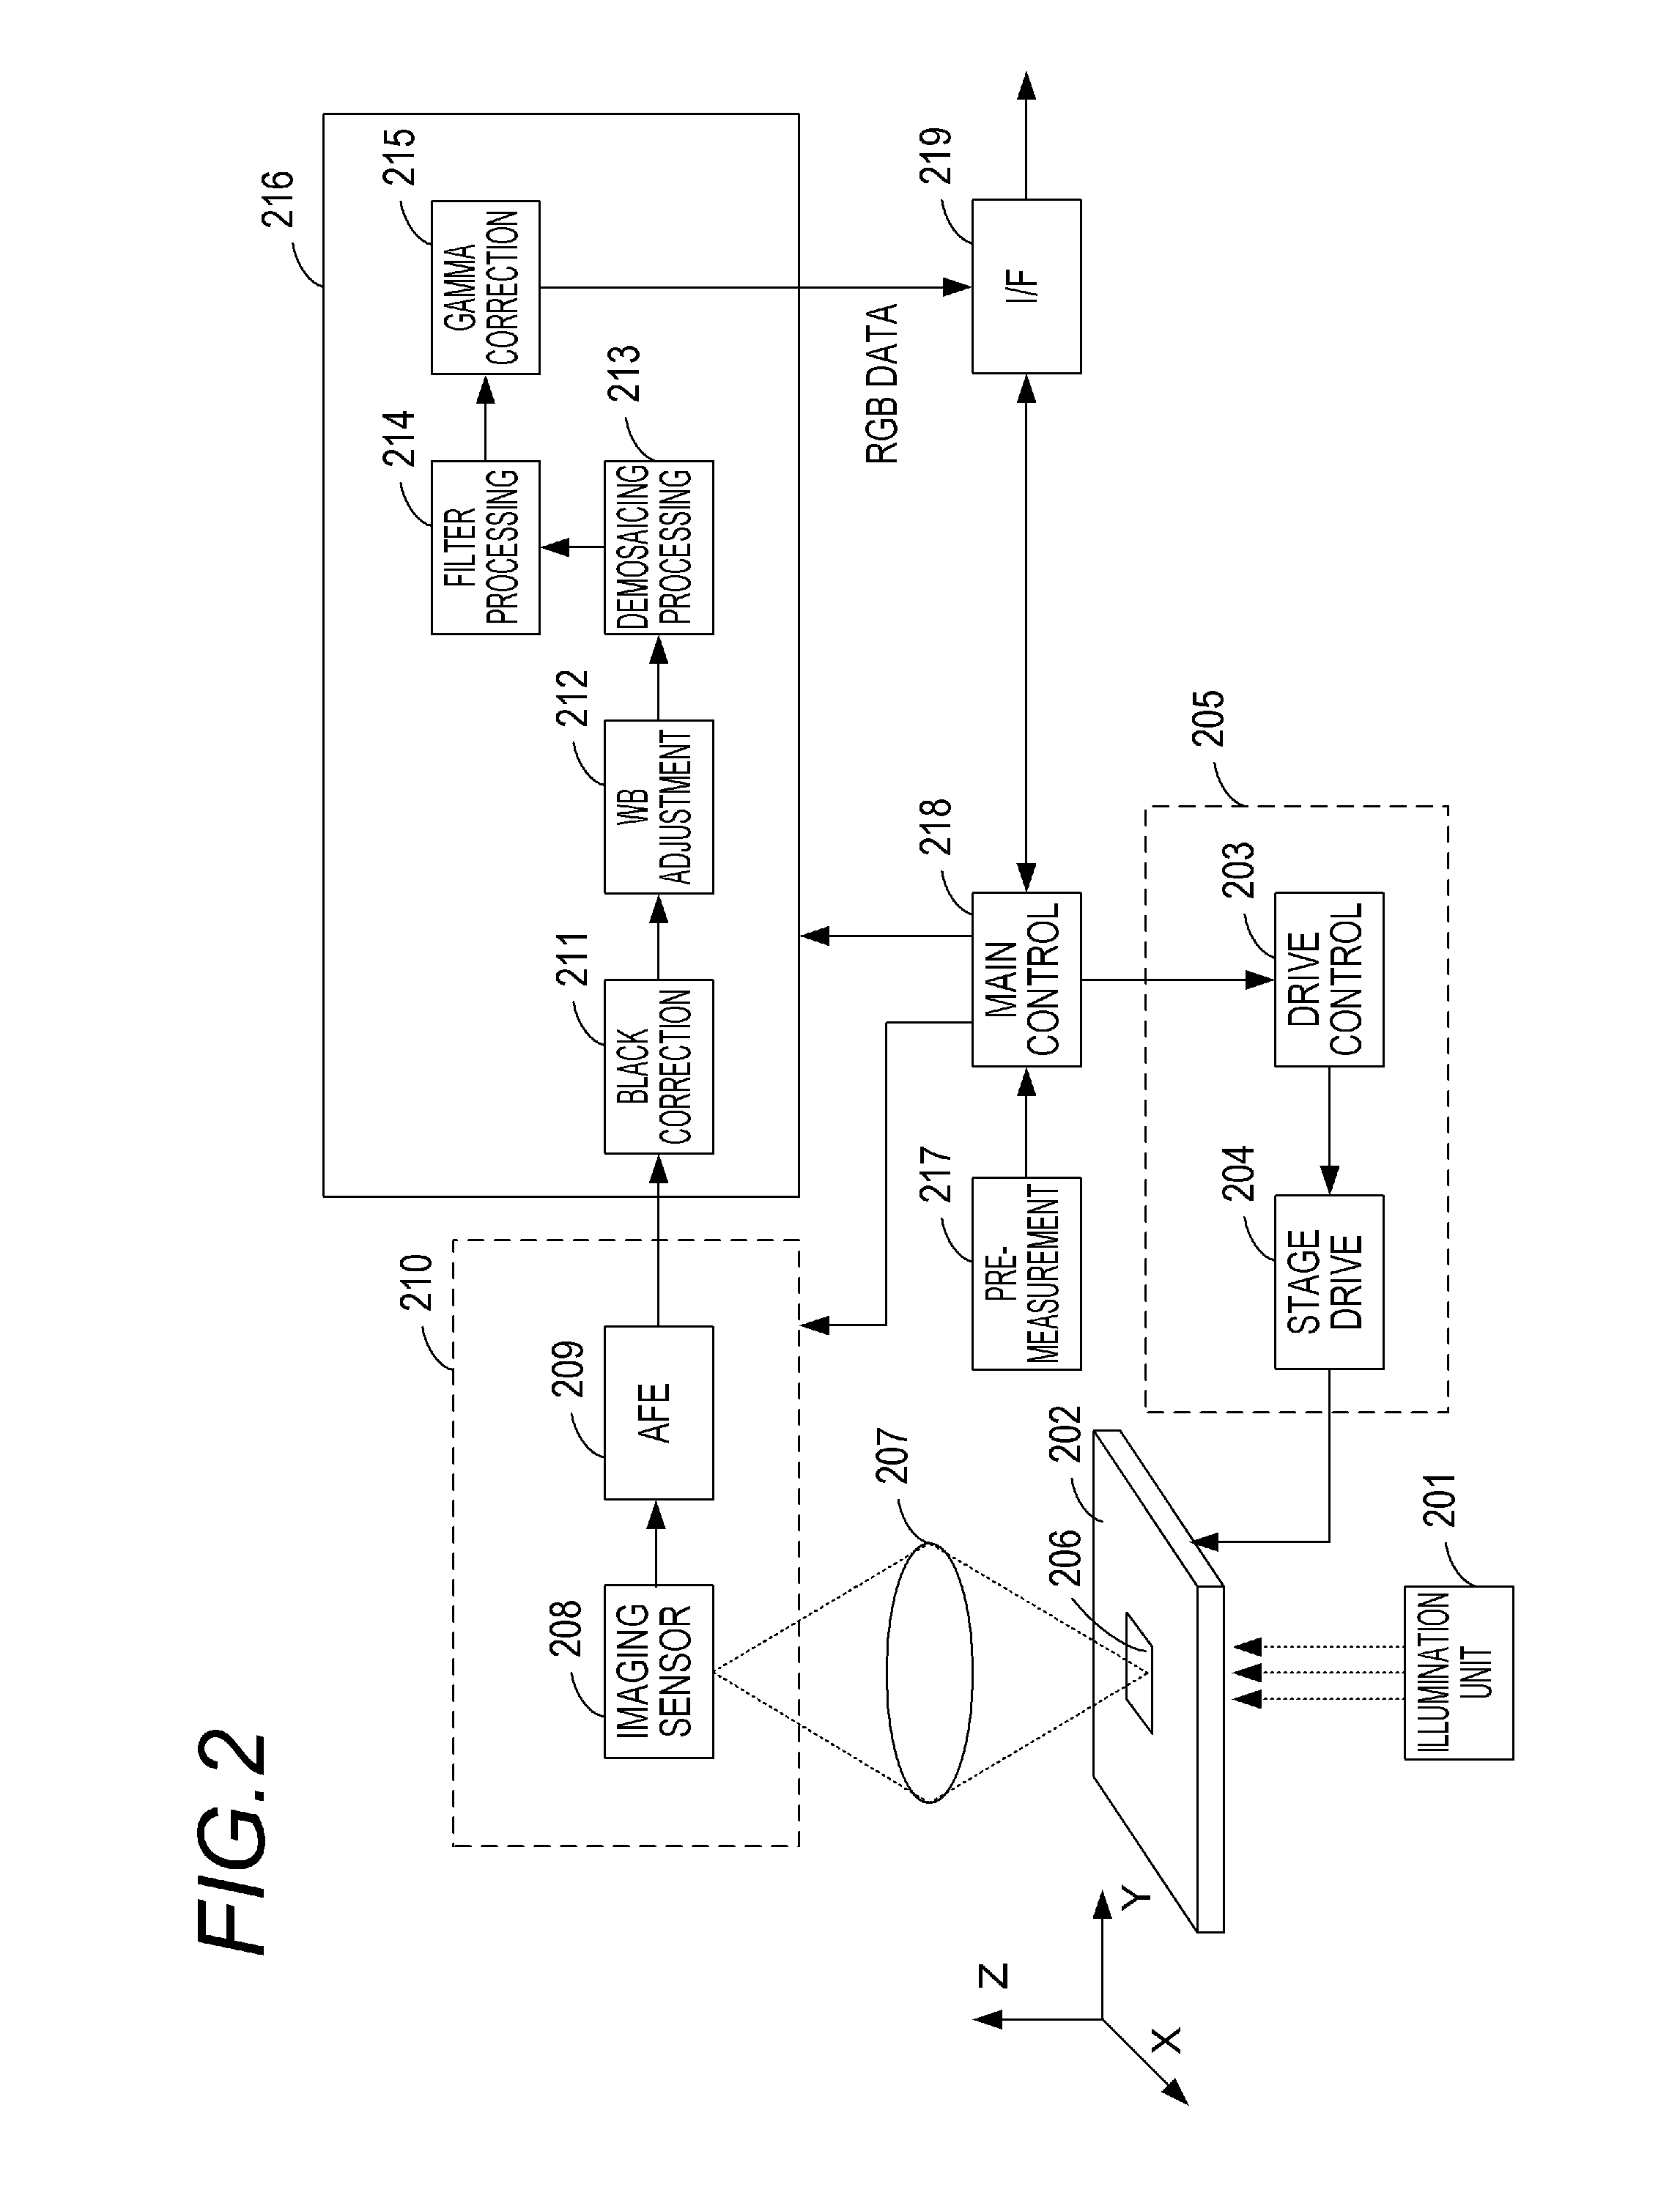 Image processing apparatus, imaging system, and image processing system